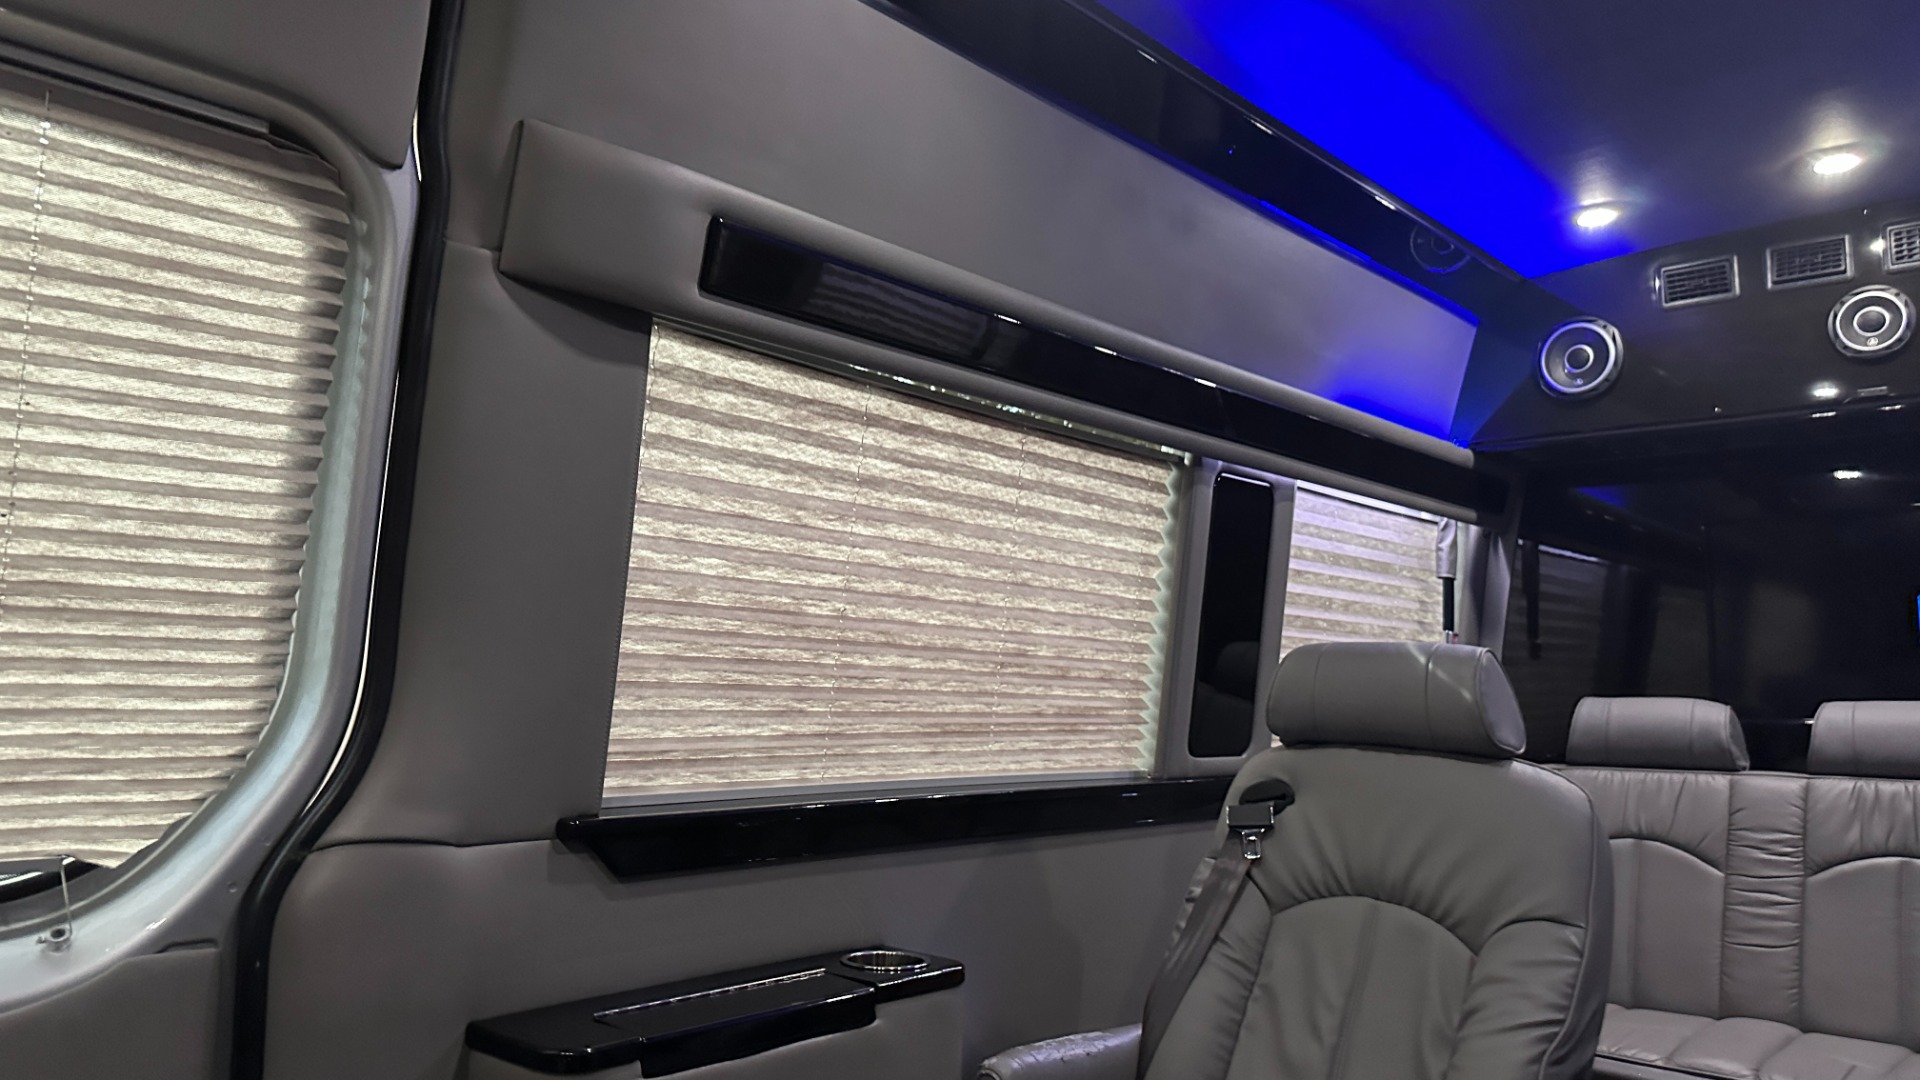 Used 2015 Mercedes-Benz Sprinter Cargo Vans EXT / MIDWEST AUTOMOTIVE DESIGN / LUXURY SPRINTER / TV'S / WIFI / MORE!! for sale $69,999 at Formula Imports in Charlotte NC 28227 85